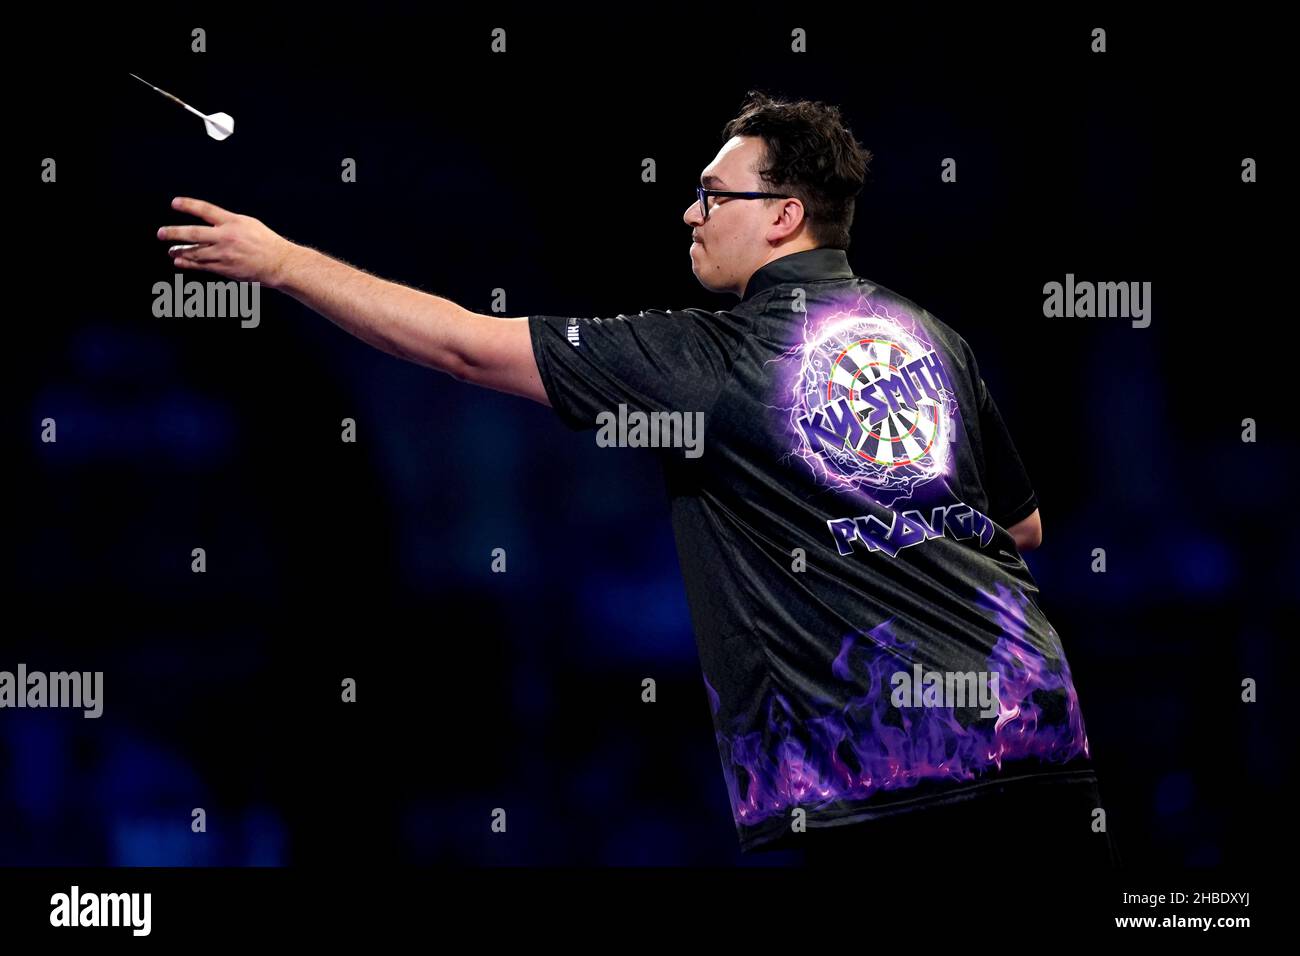 Ky Smith during his match against Maik Kuivenhoven on day five of the William Hill World Darts Championship at Alexandra Palace, London. Picture date: Sunday December 19, 2021. Stock Photo